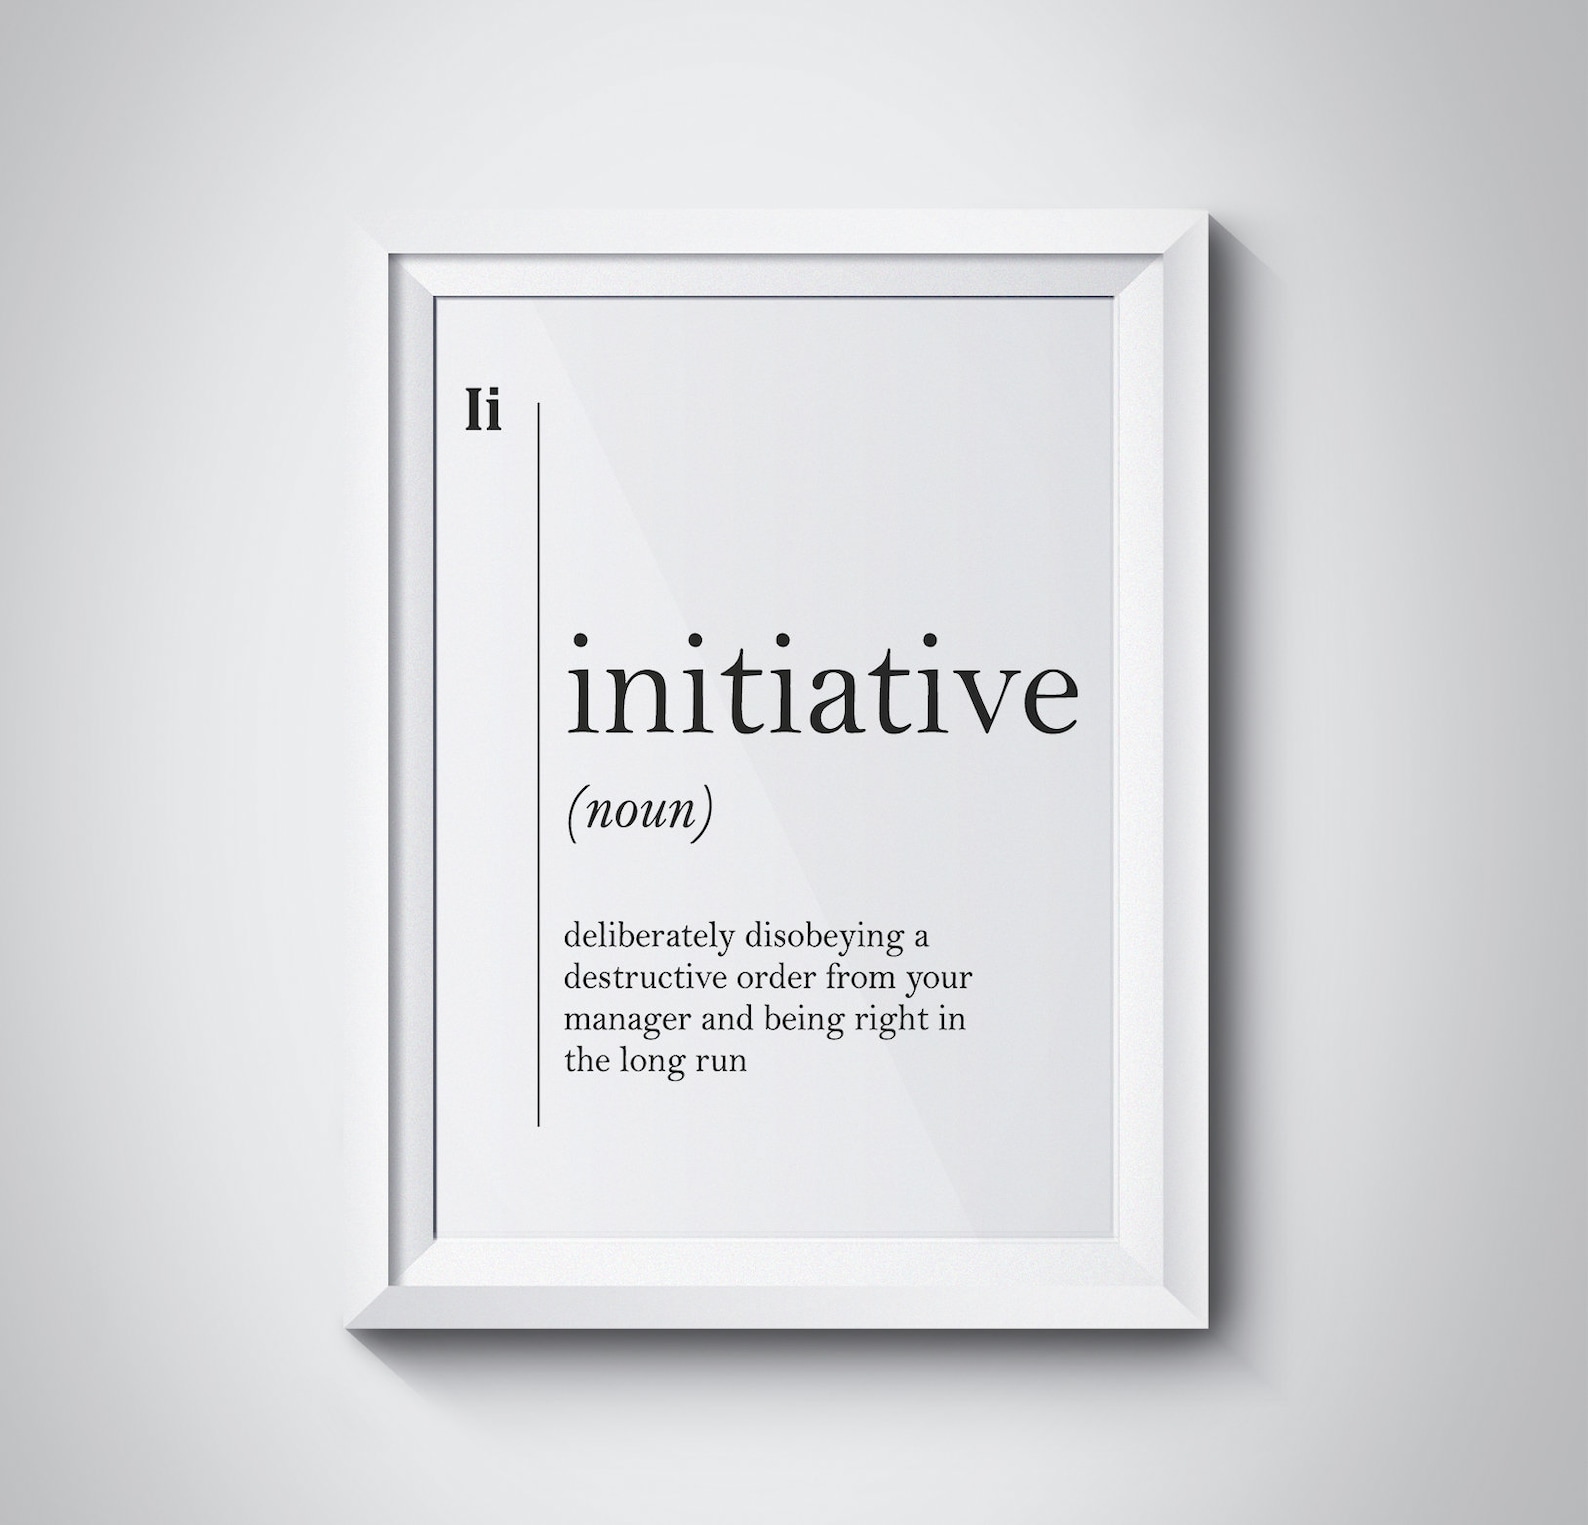 initiater definition